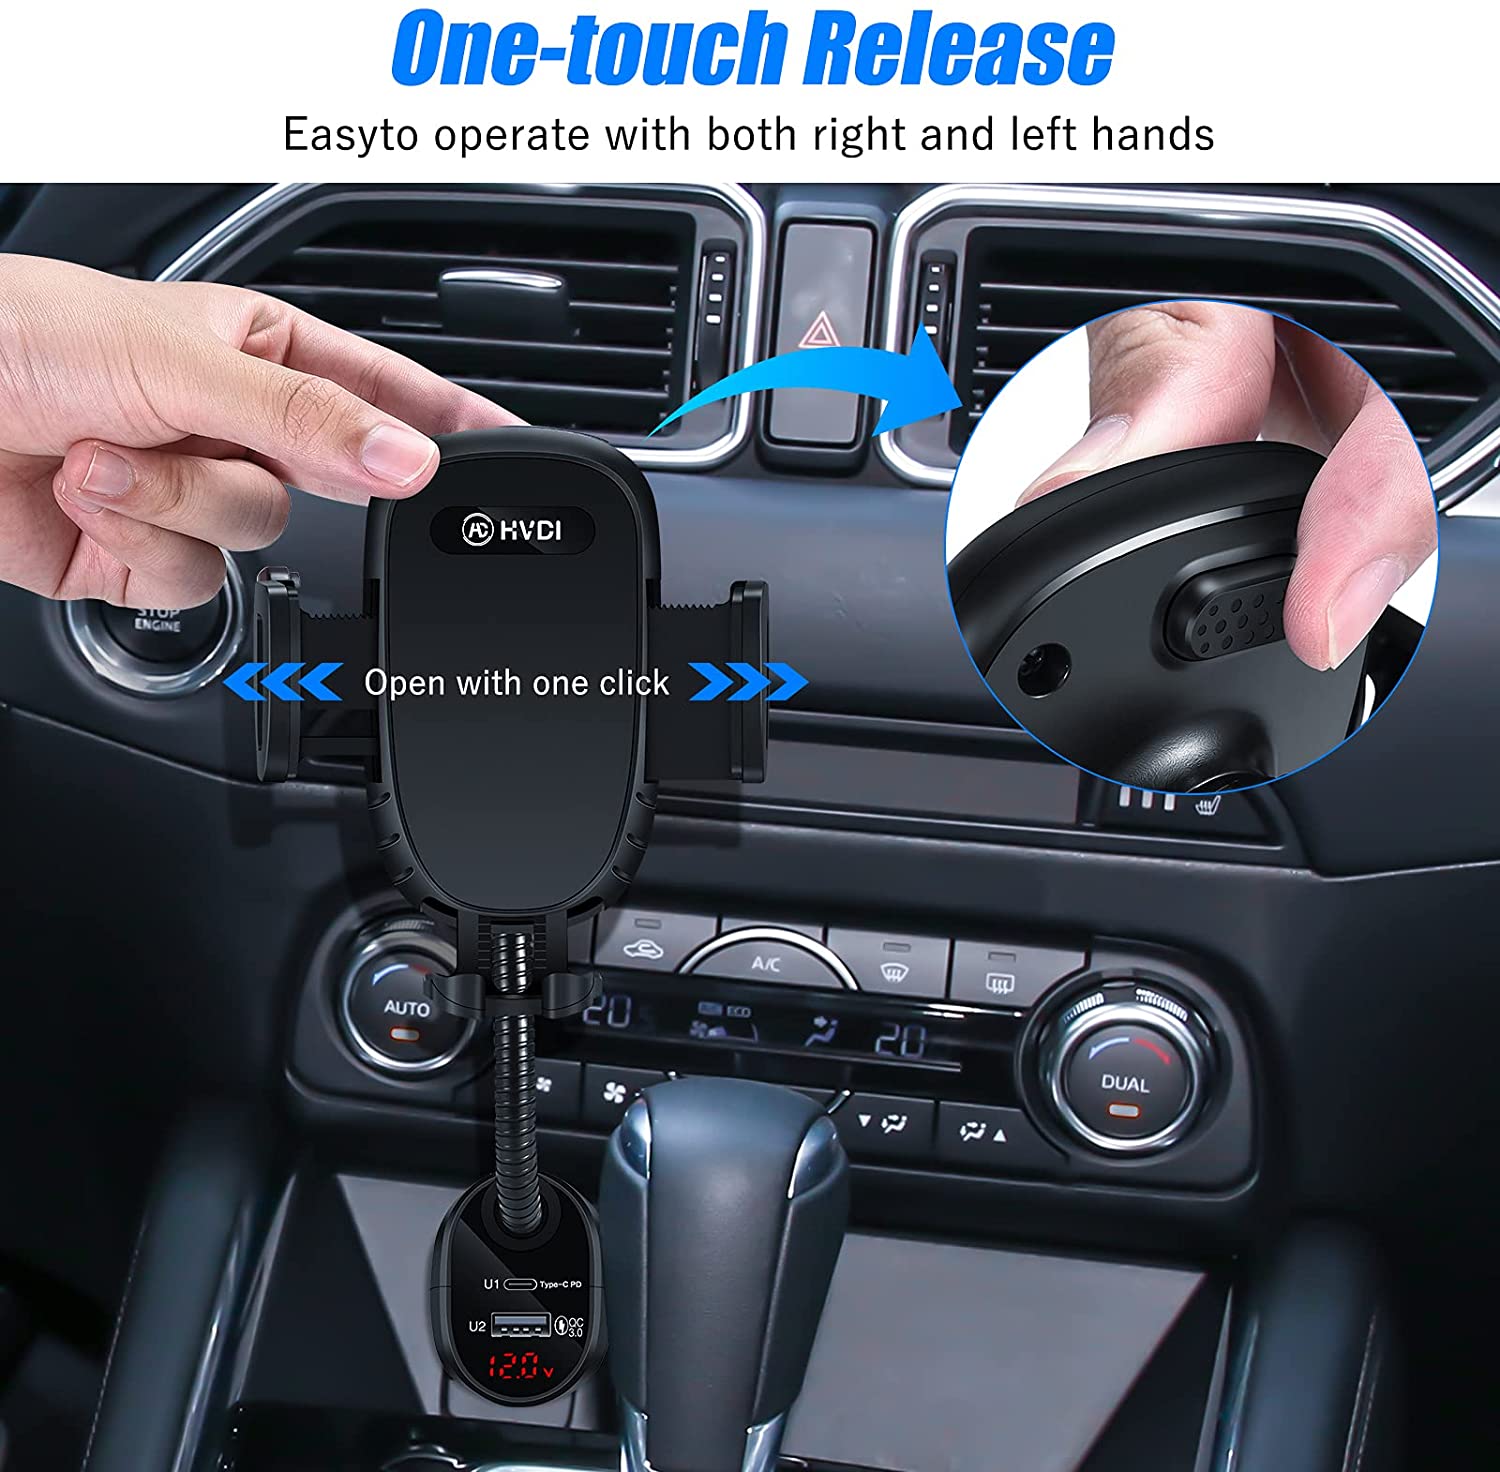 HVDI Car Cigarette Lighter Phone Mount - USB C Fast Car Charger Phone Holder,36W Power Delivery Dual Port(PD+QC3.0),Adjustable Cell Phone Cradle with Voltage Detector